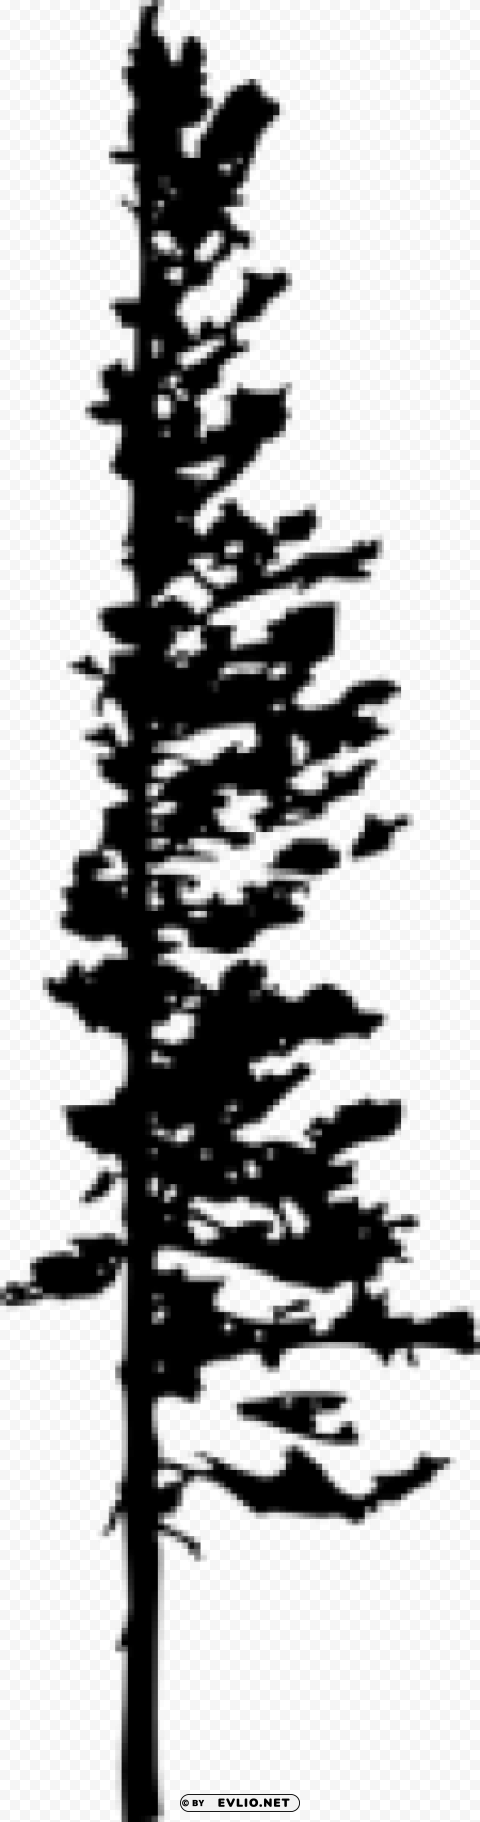 Pine Tree Silhouette PNG with Isolated Object and Transparency